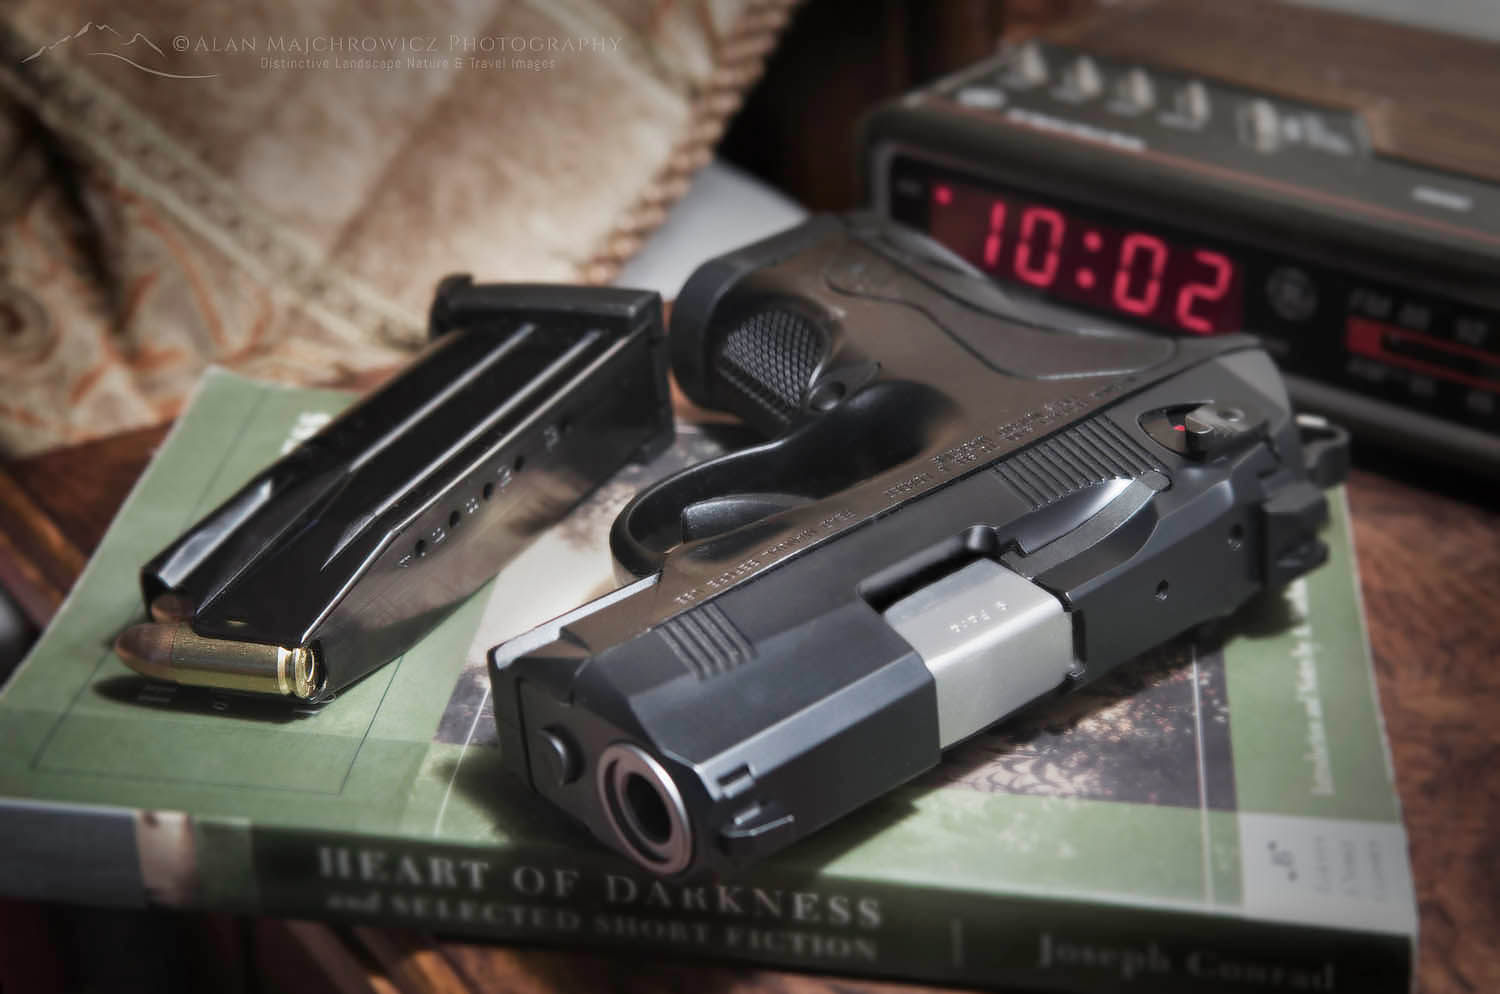 Beretta PX4 Storm semi-automatic pistol with 9mm ammunition on bedroom nightstand